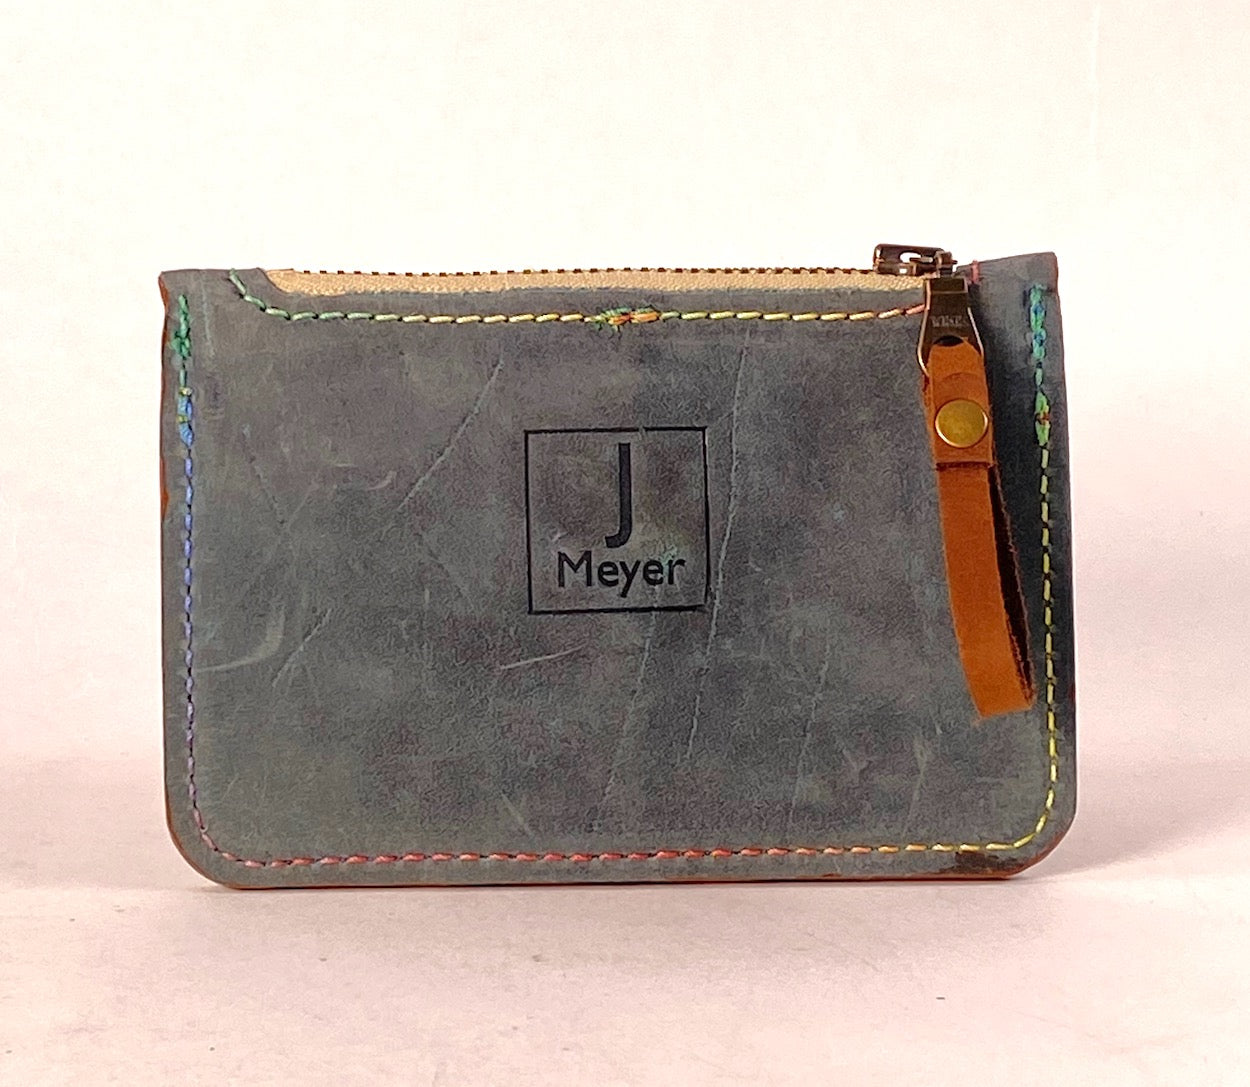 Denim Blue Leather Card & Coin Wallet with Variegated Thread Detail